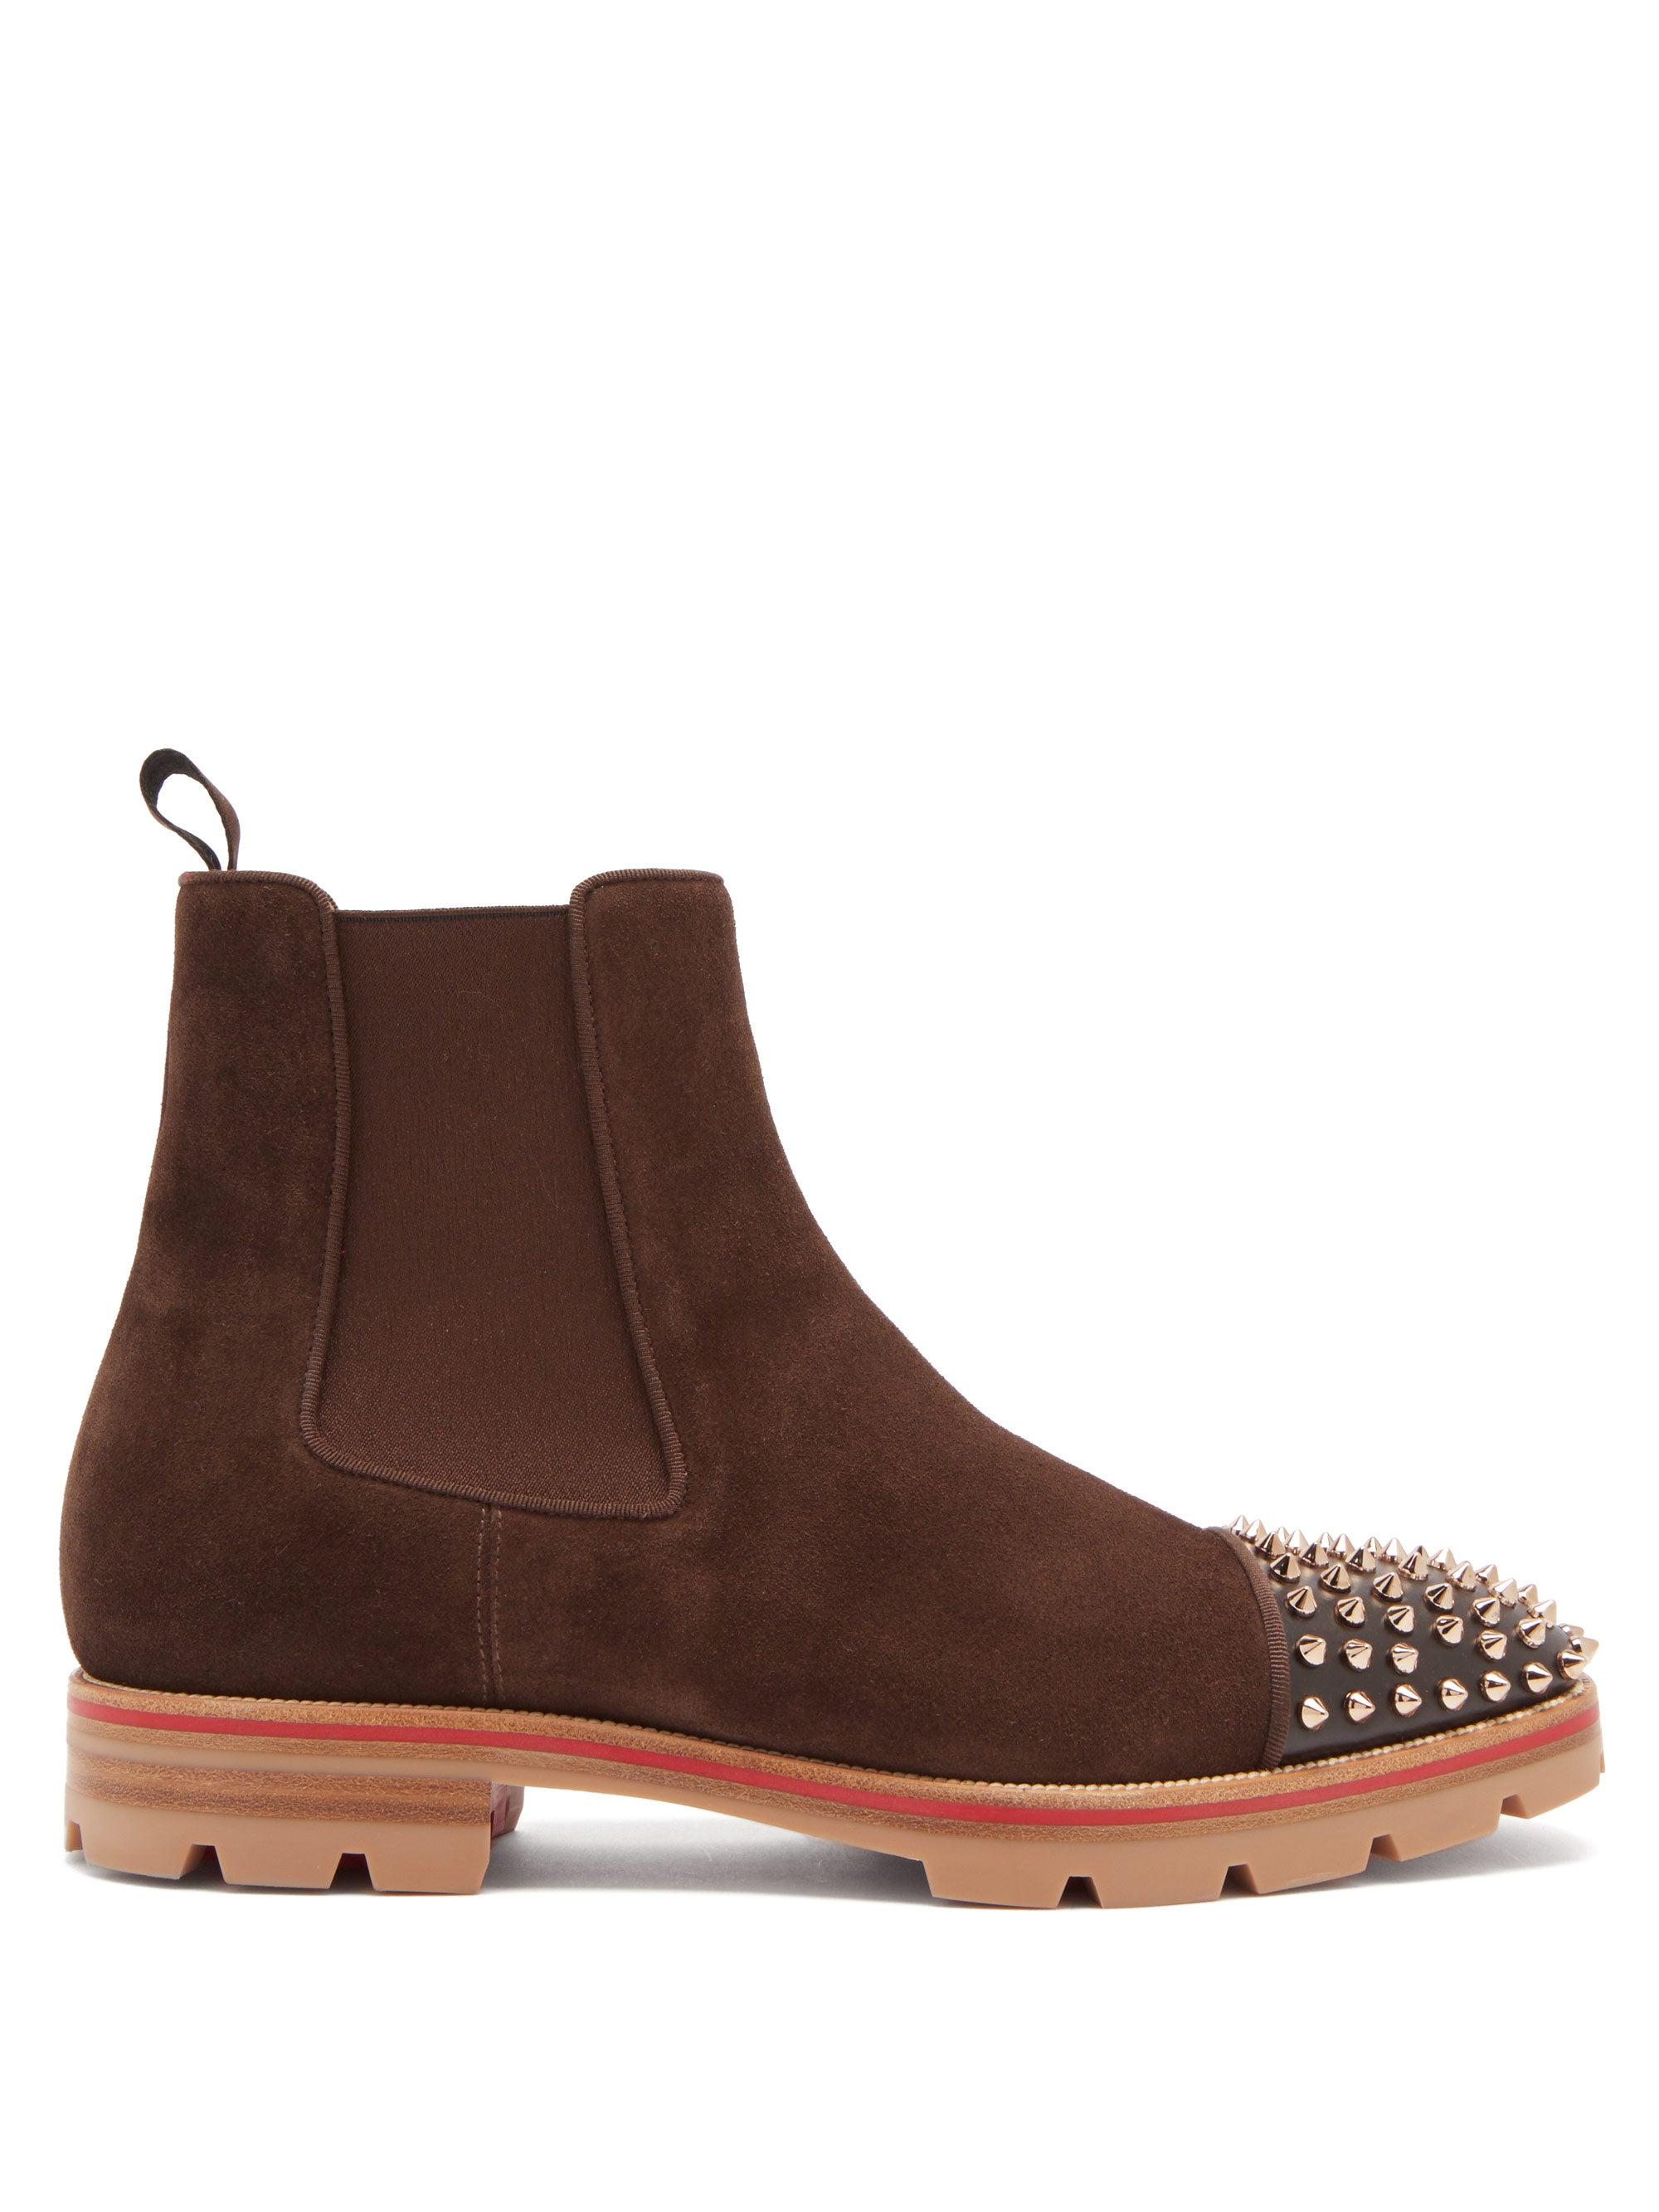 Christian Louboutin Melon Spikes Suede Chelsea Boots in Brown for Men ...